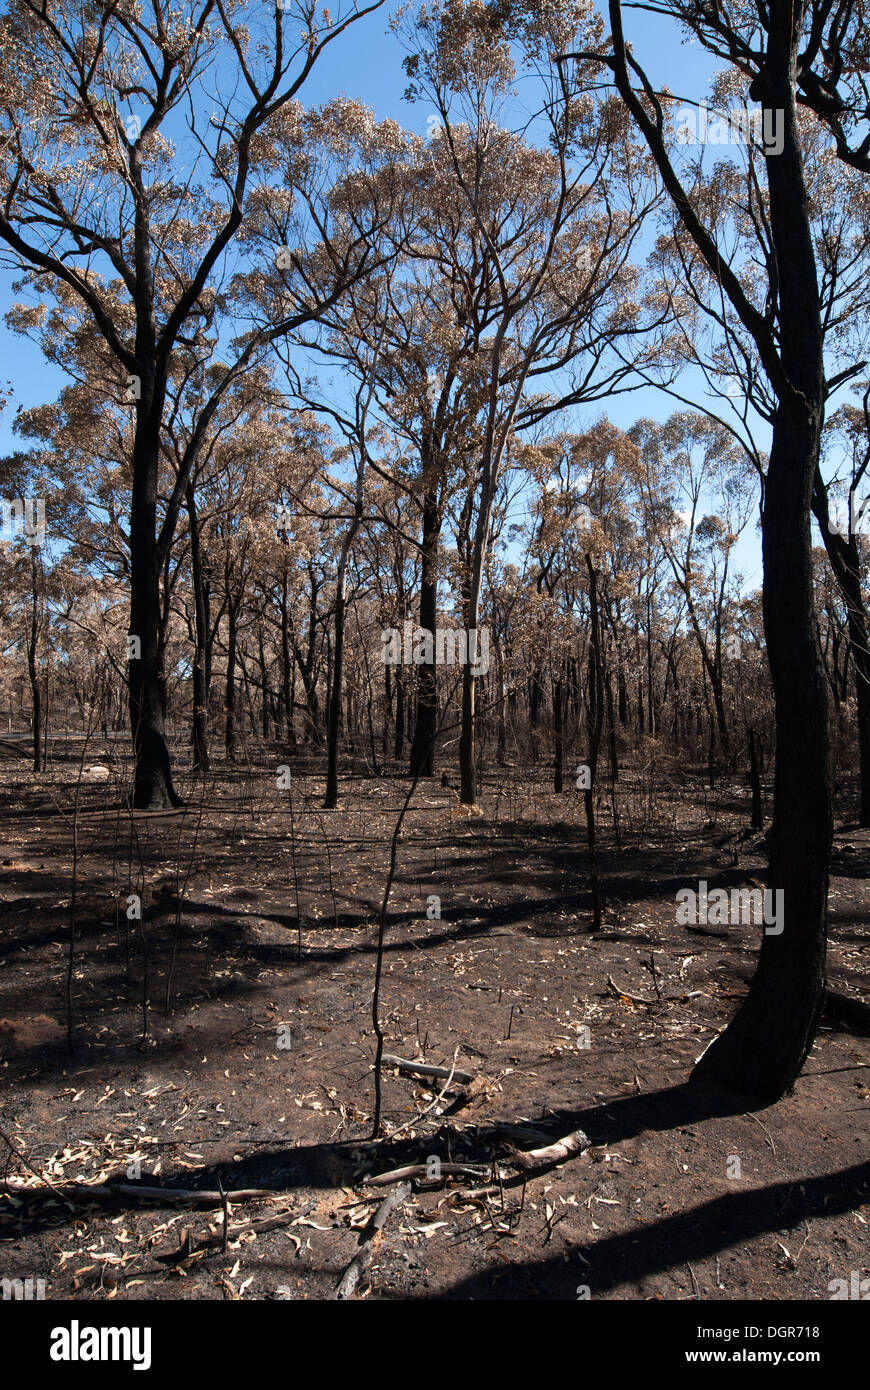 This scene, comprising parched earth and burnt trees, was captured following the recent bushfires in New South Wales, Australia Stock Photo